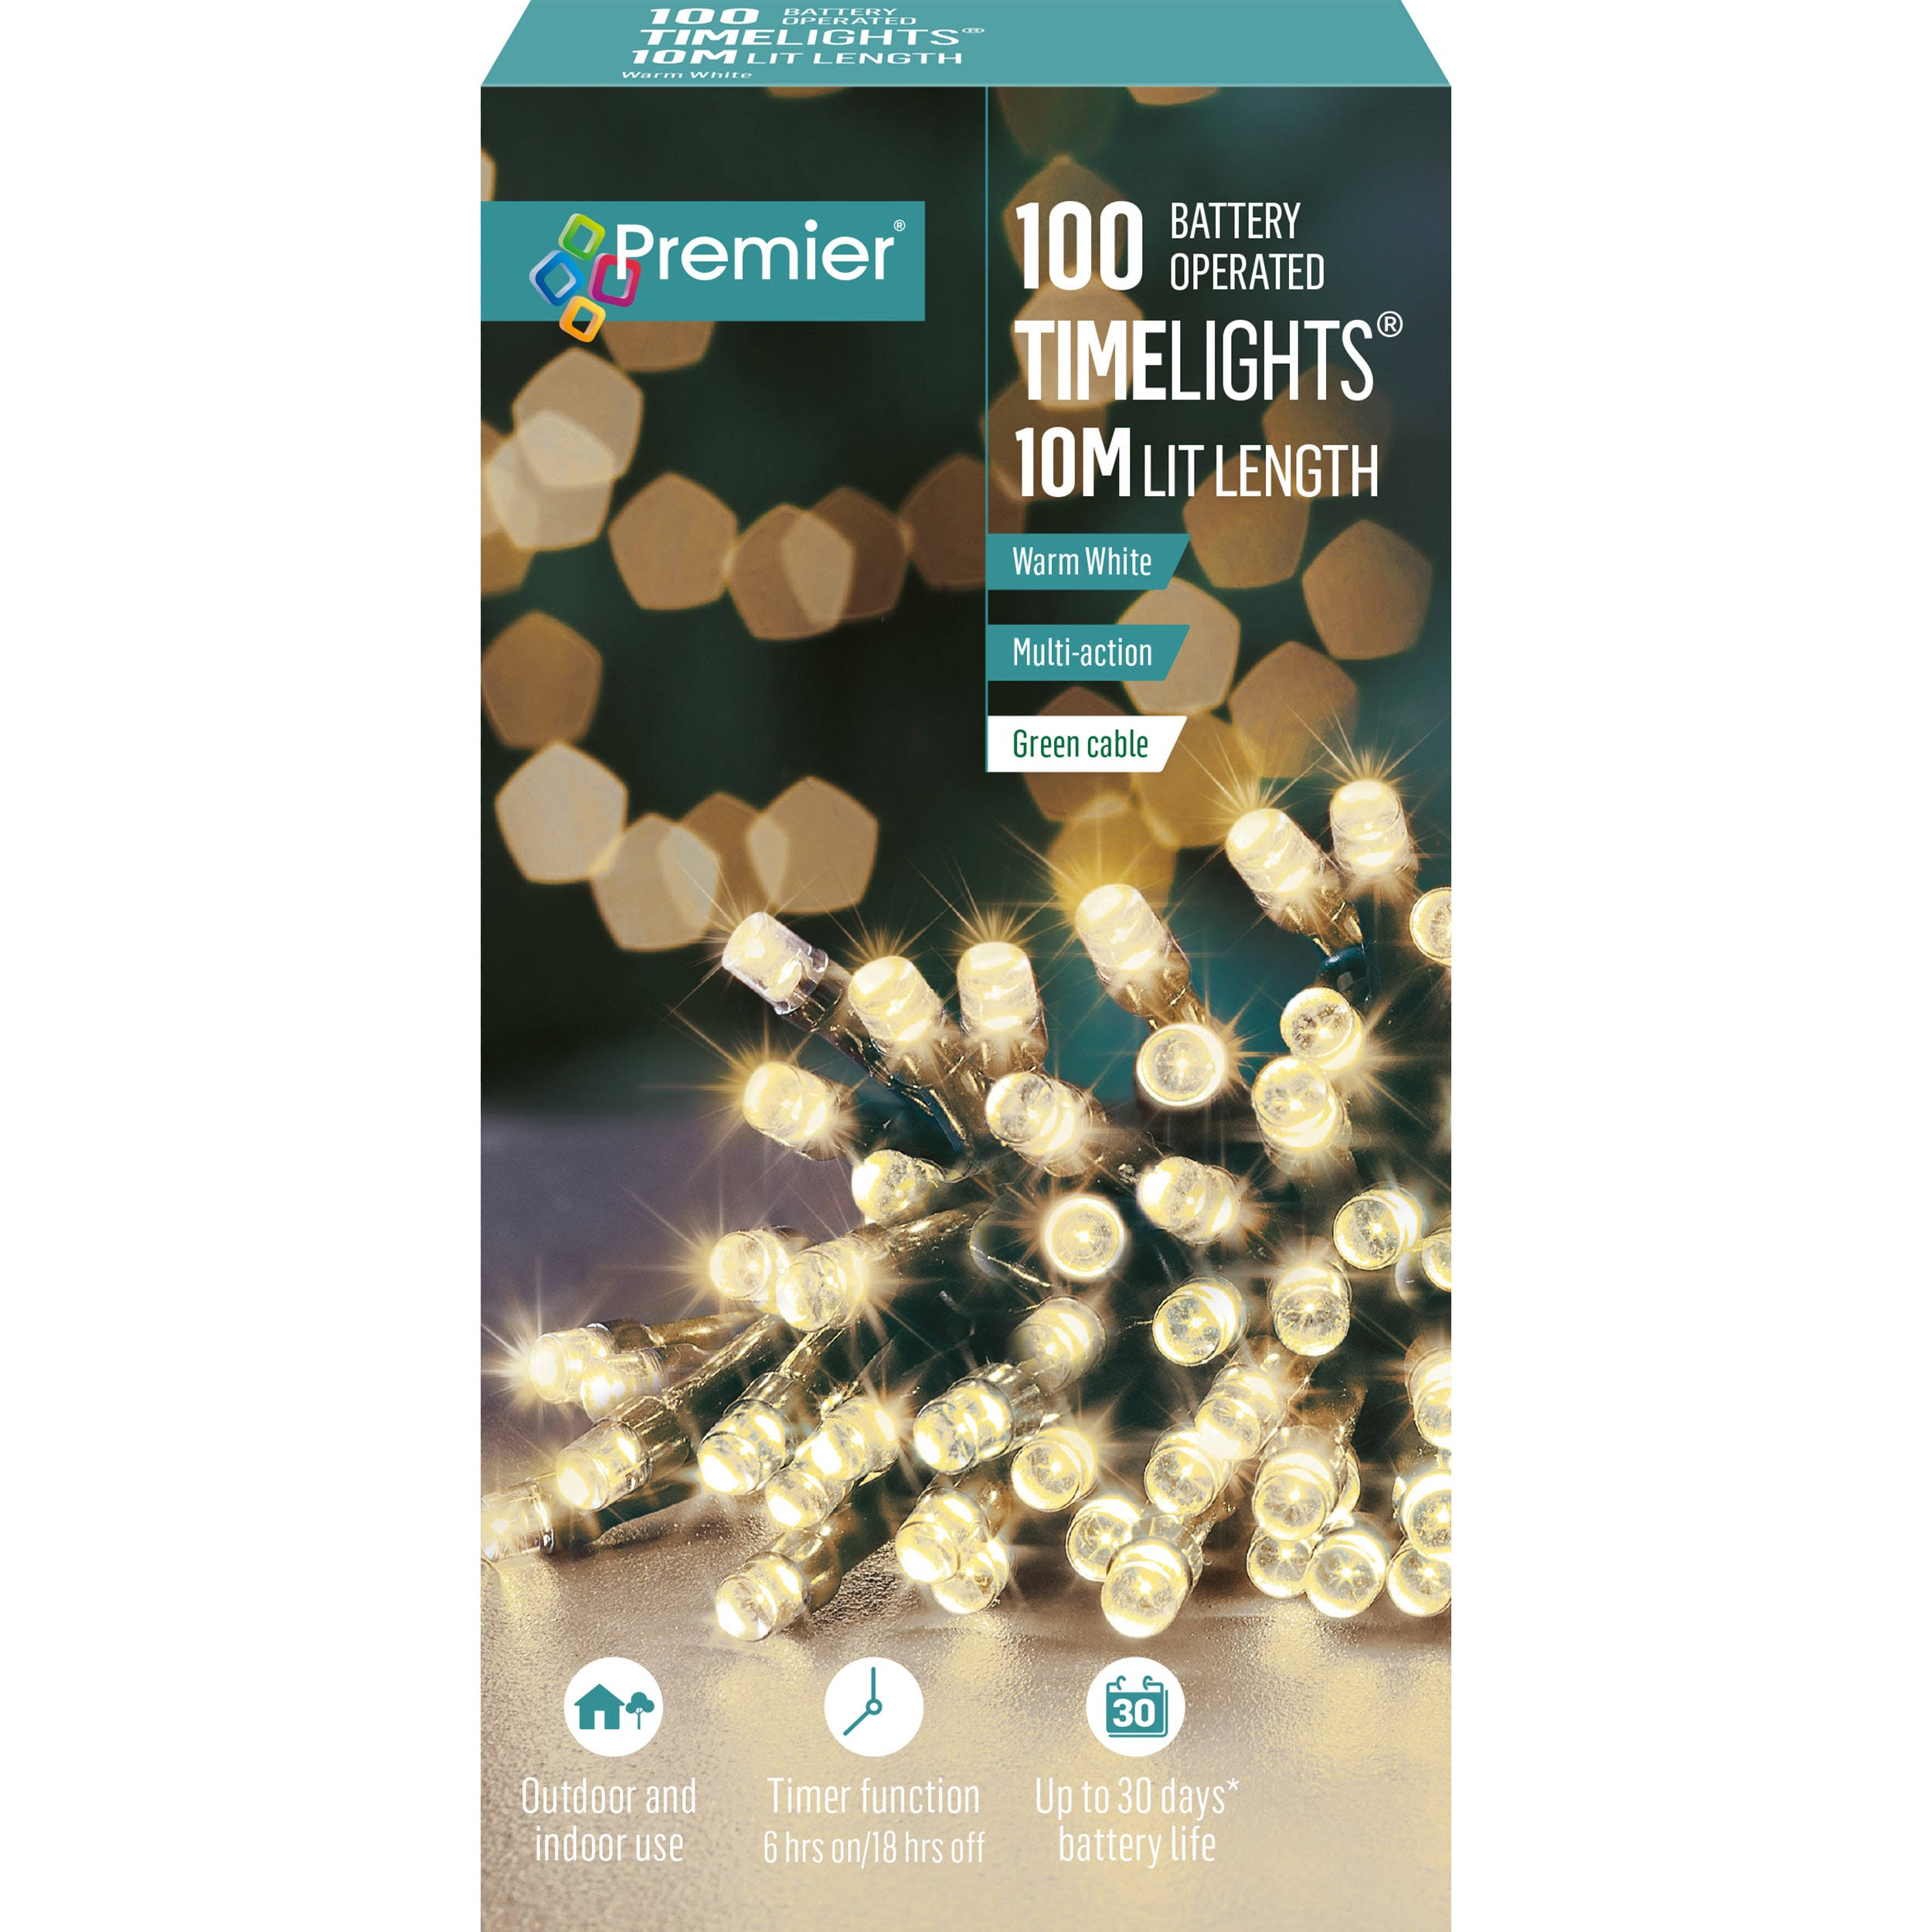 Premier 100 Battery Operated LED Lights, Warm White